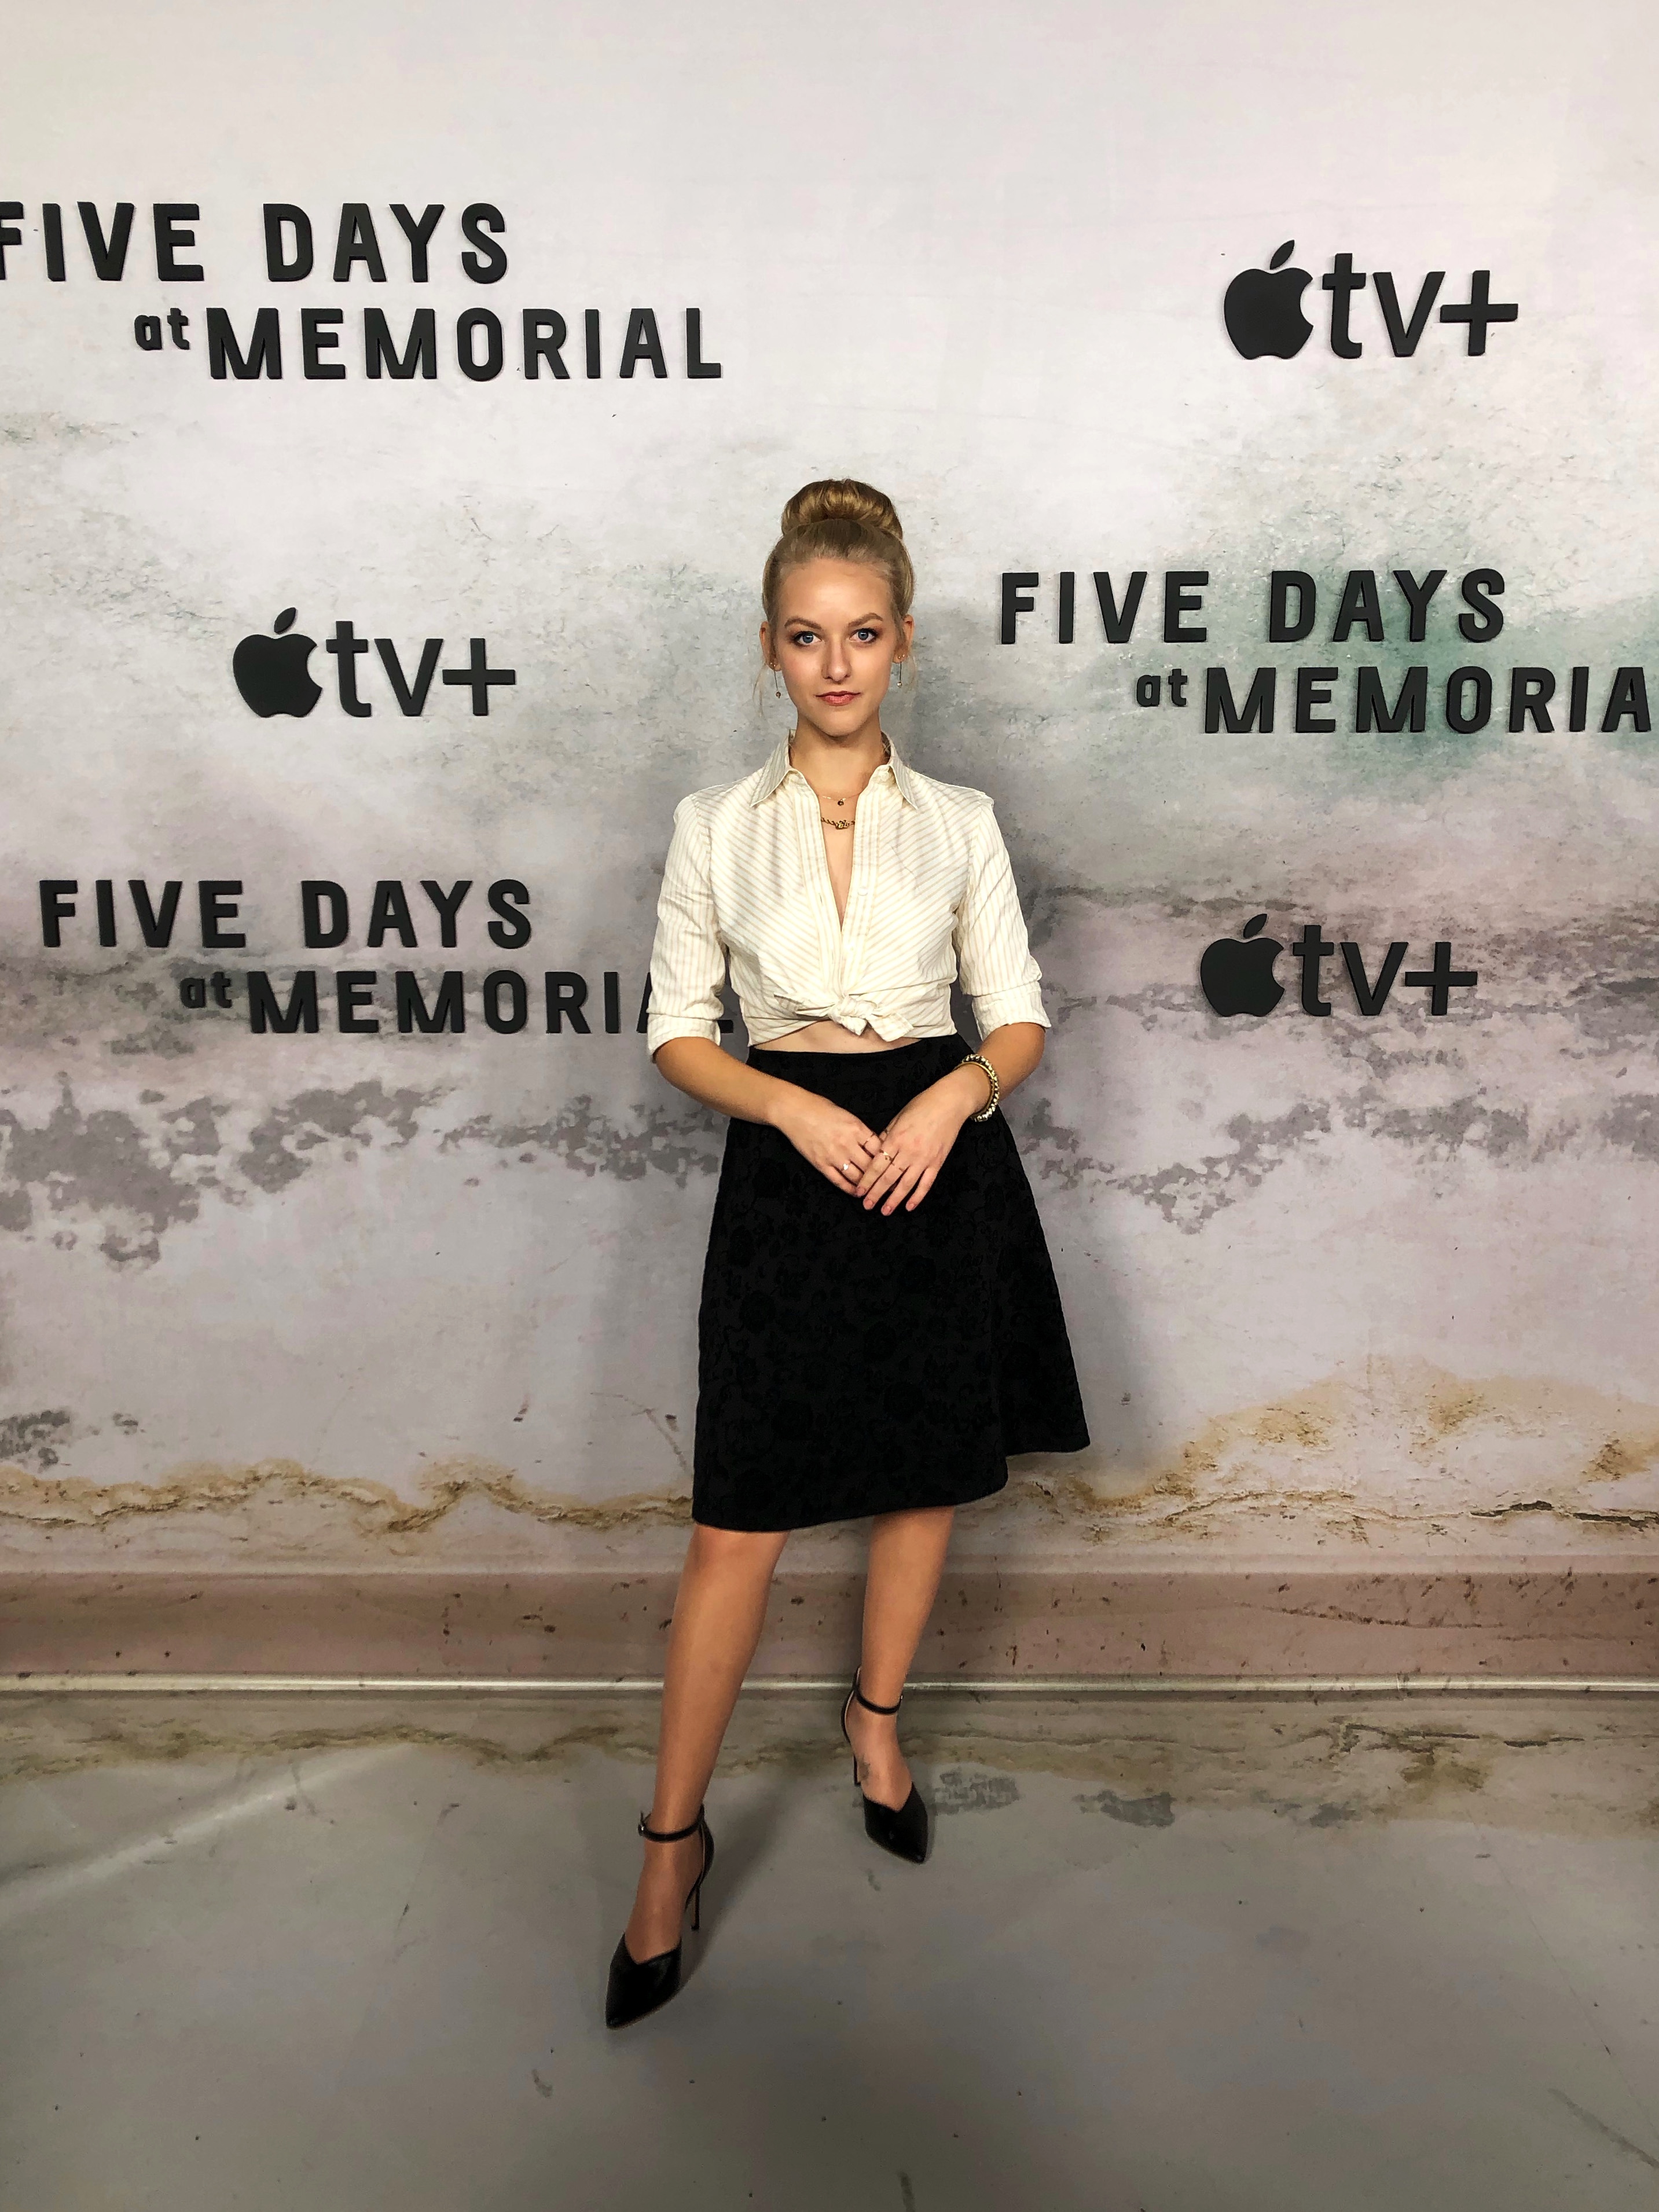 Rebekah Patton at an event for Five Days at Memorial (2022)